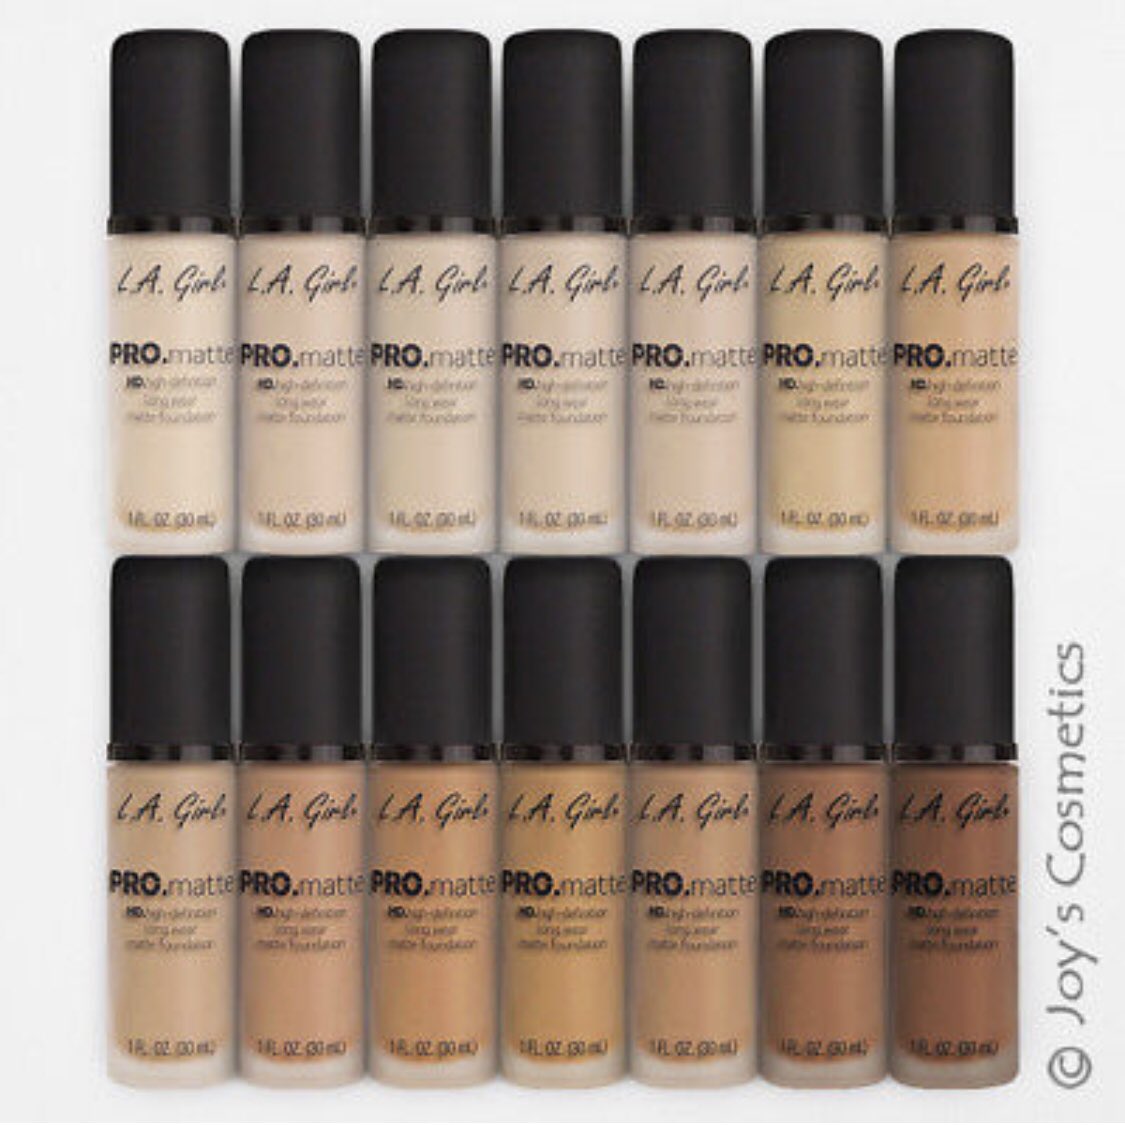 Y’all SLEEP on  @lagirlusa becuase the foundations, concealer and the mixers they have for their foundations are all bomb.The matte and illuminating mixed together is an ELITE combo, and the shade adjusters should be in every mua kit.Foundations + mixers: $8.99Concealer: $3.99